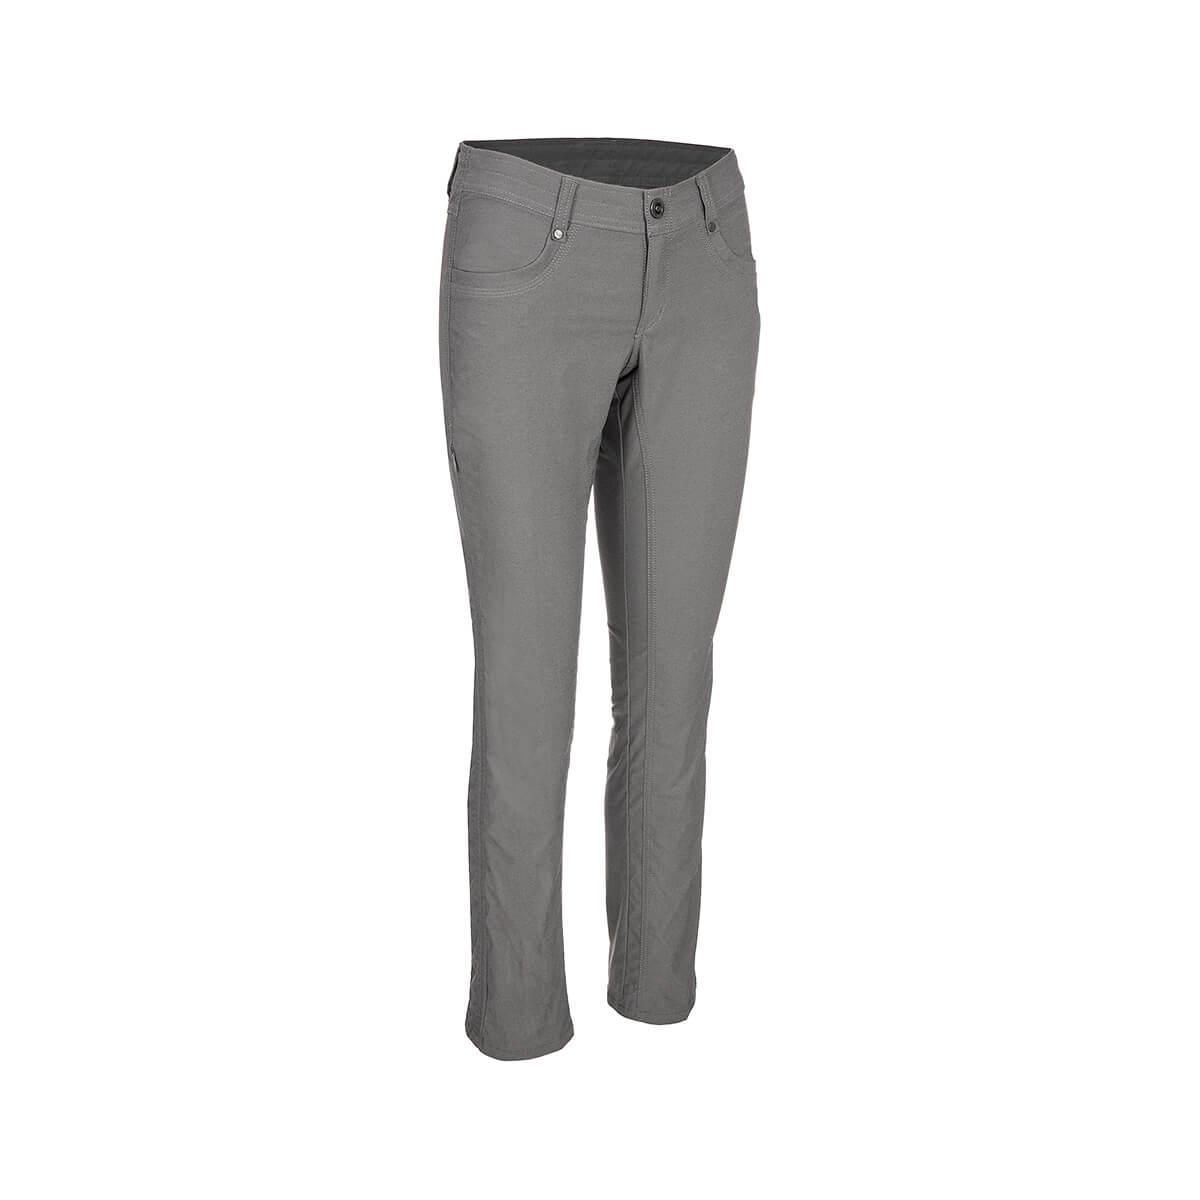 Dovetail Workwear Women's Grey Canvas Work Pants (14 X 32) in the